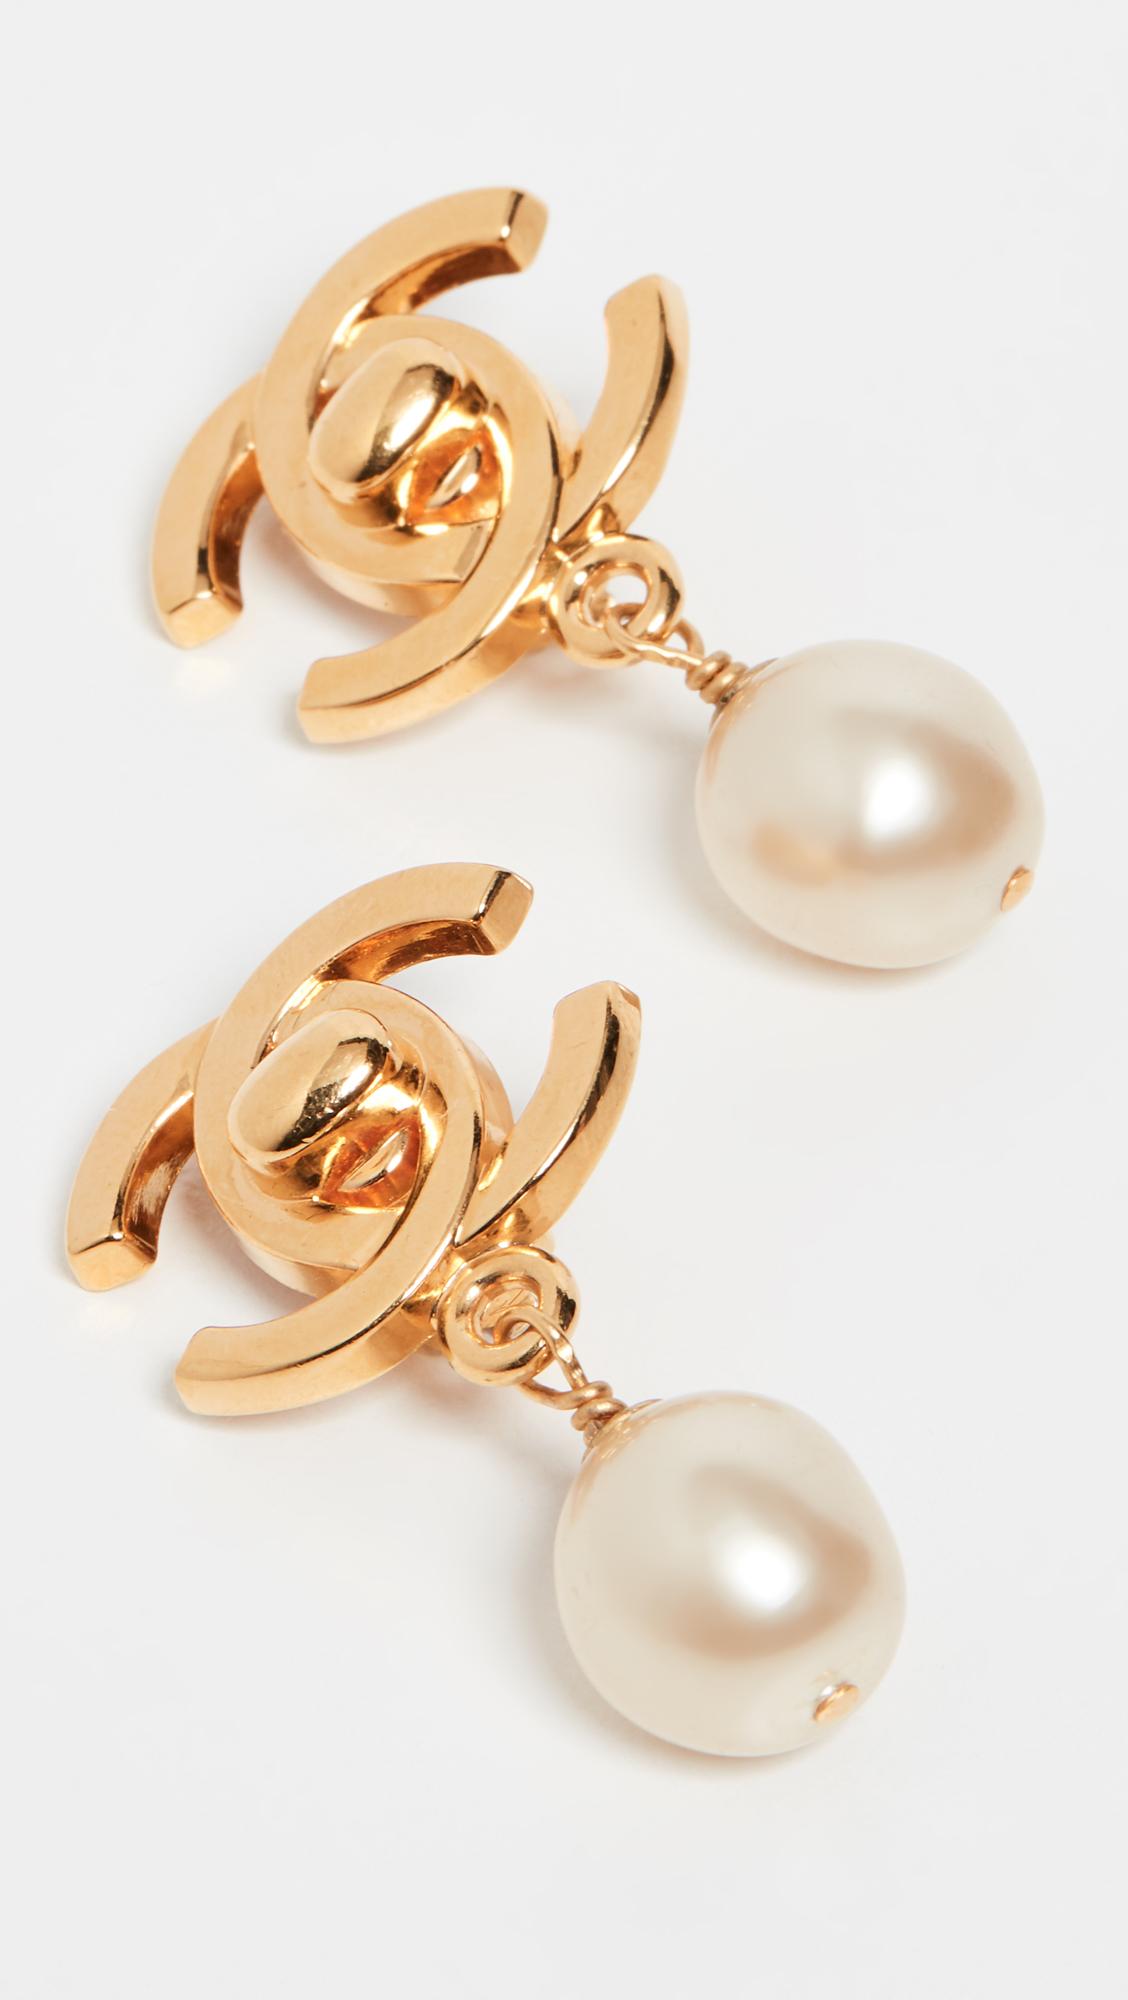 What Goes Around Comes Around Chanel Turn Lock Imitation Pearl Earrings in  Metallic